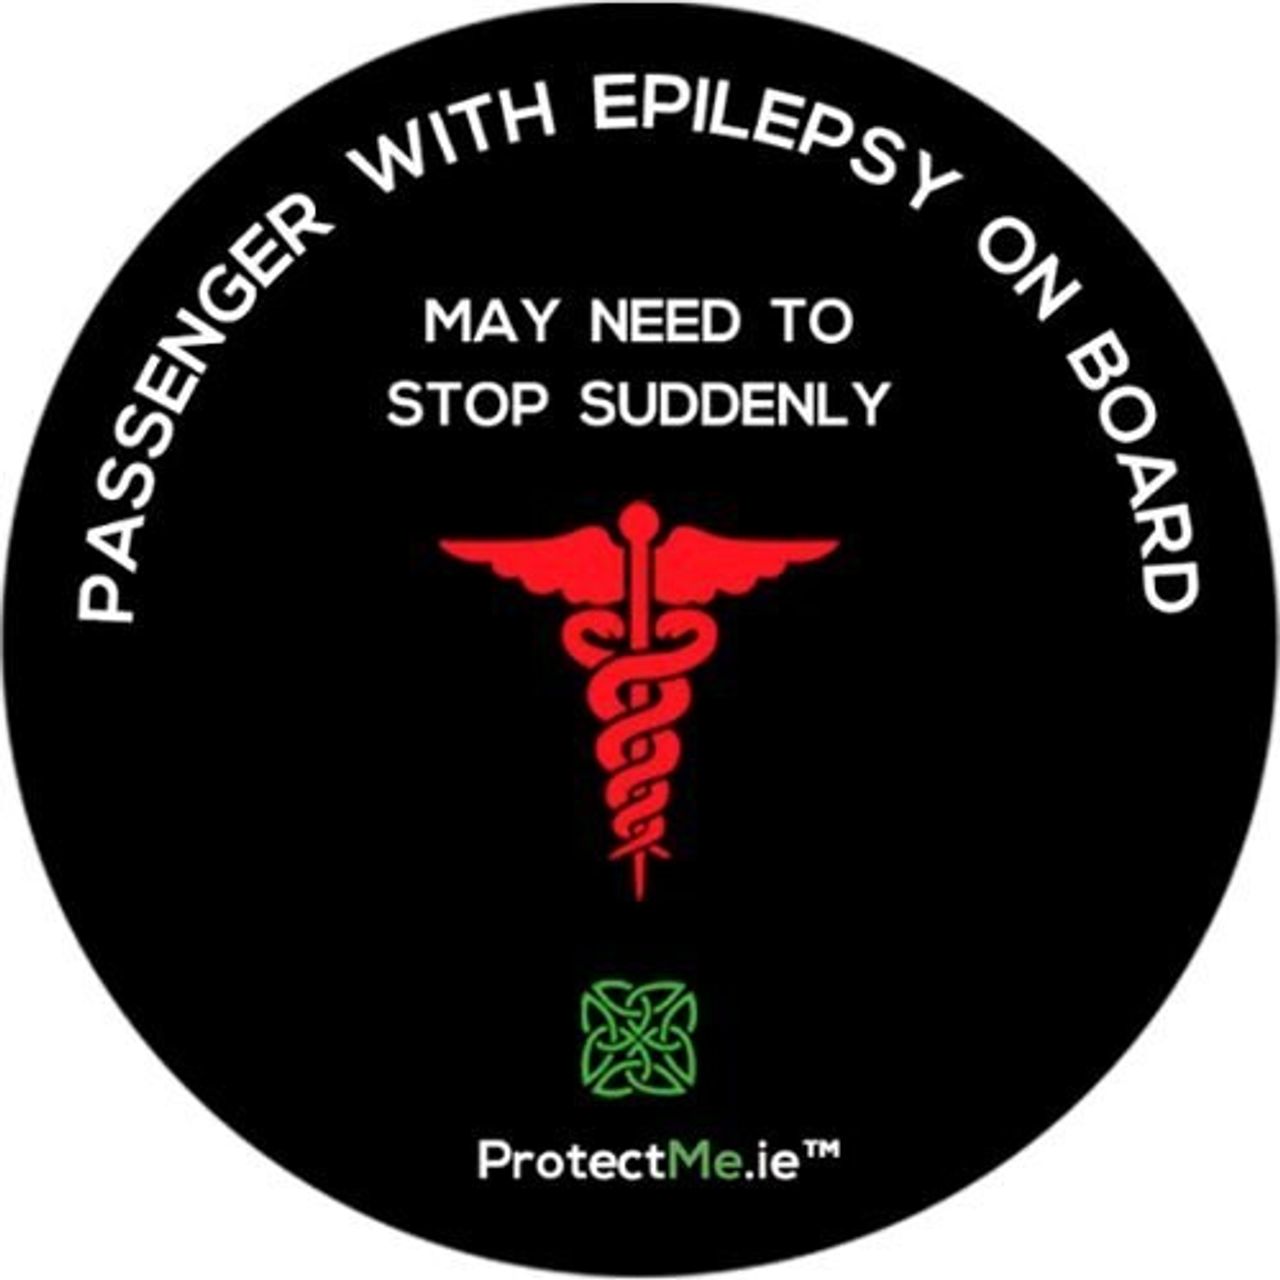 Protect Me - Car Window Decal Passenger with Epilepsy on board - Black